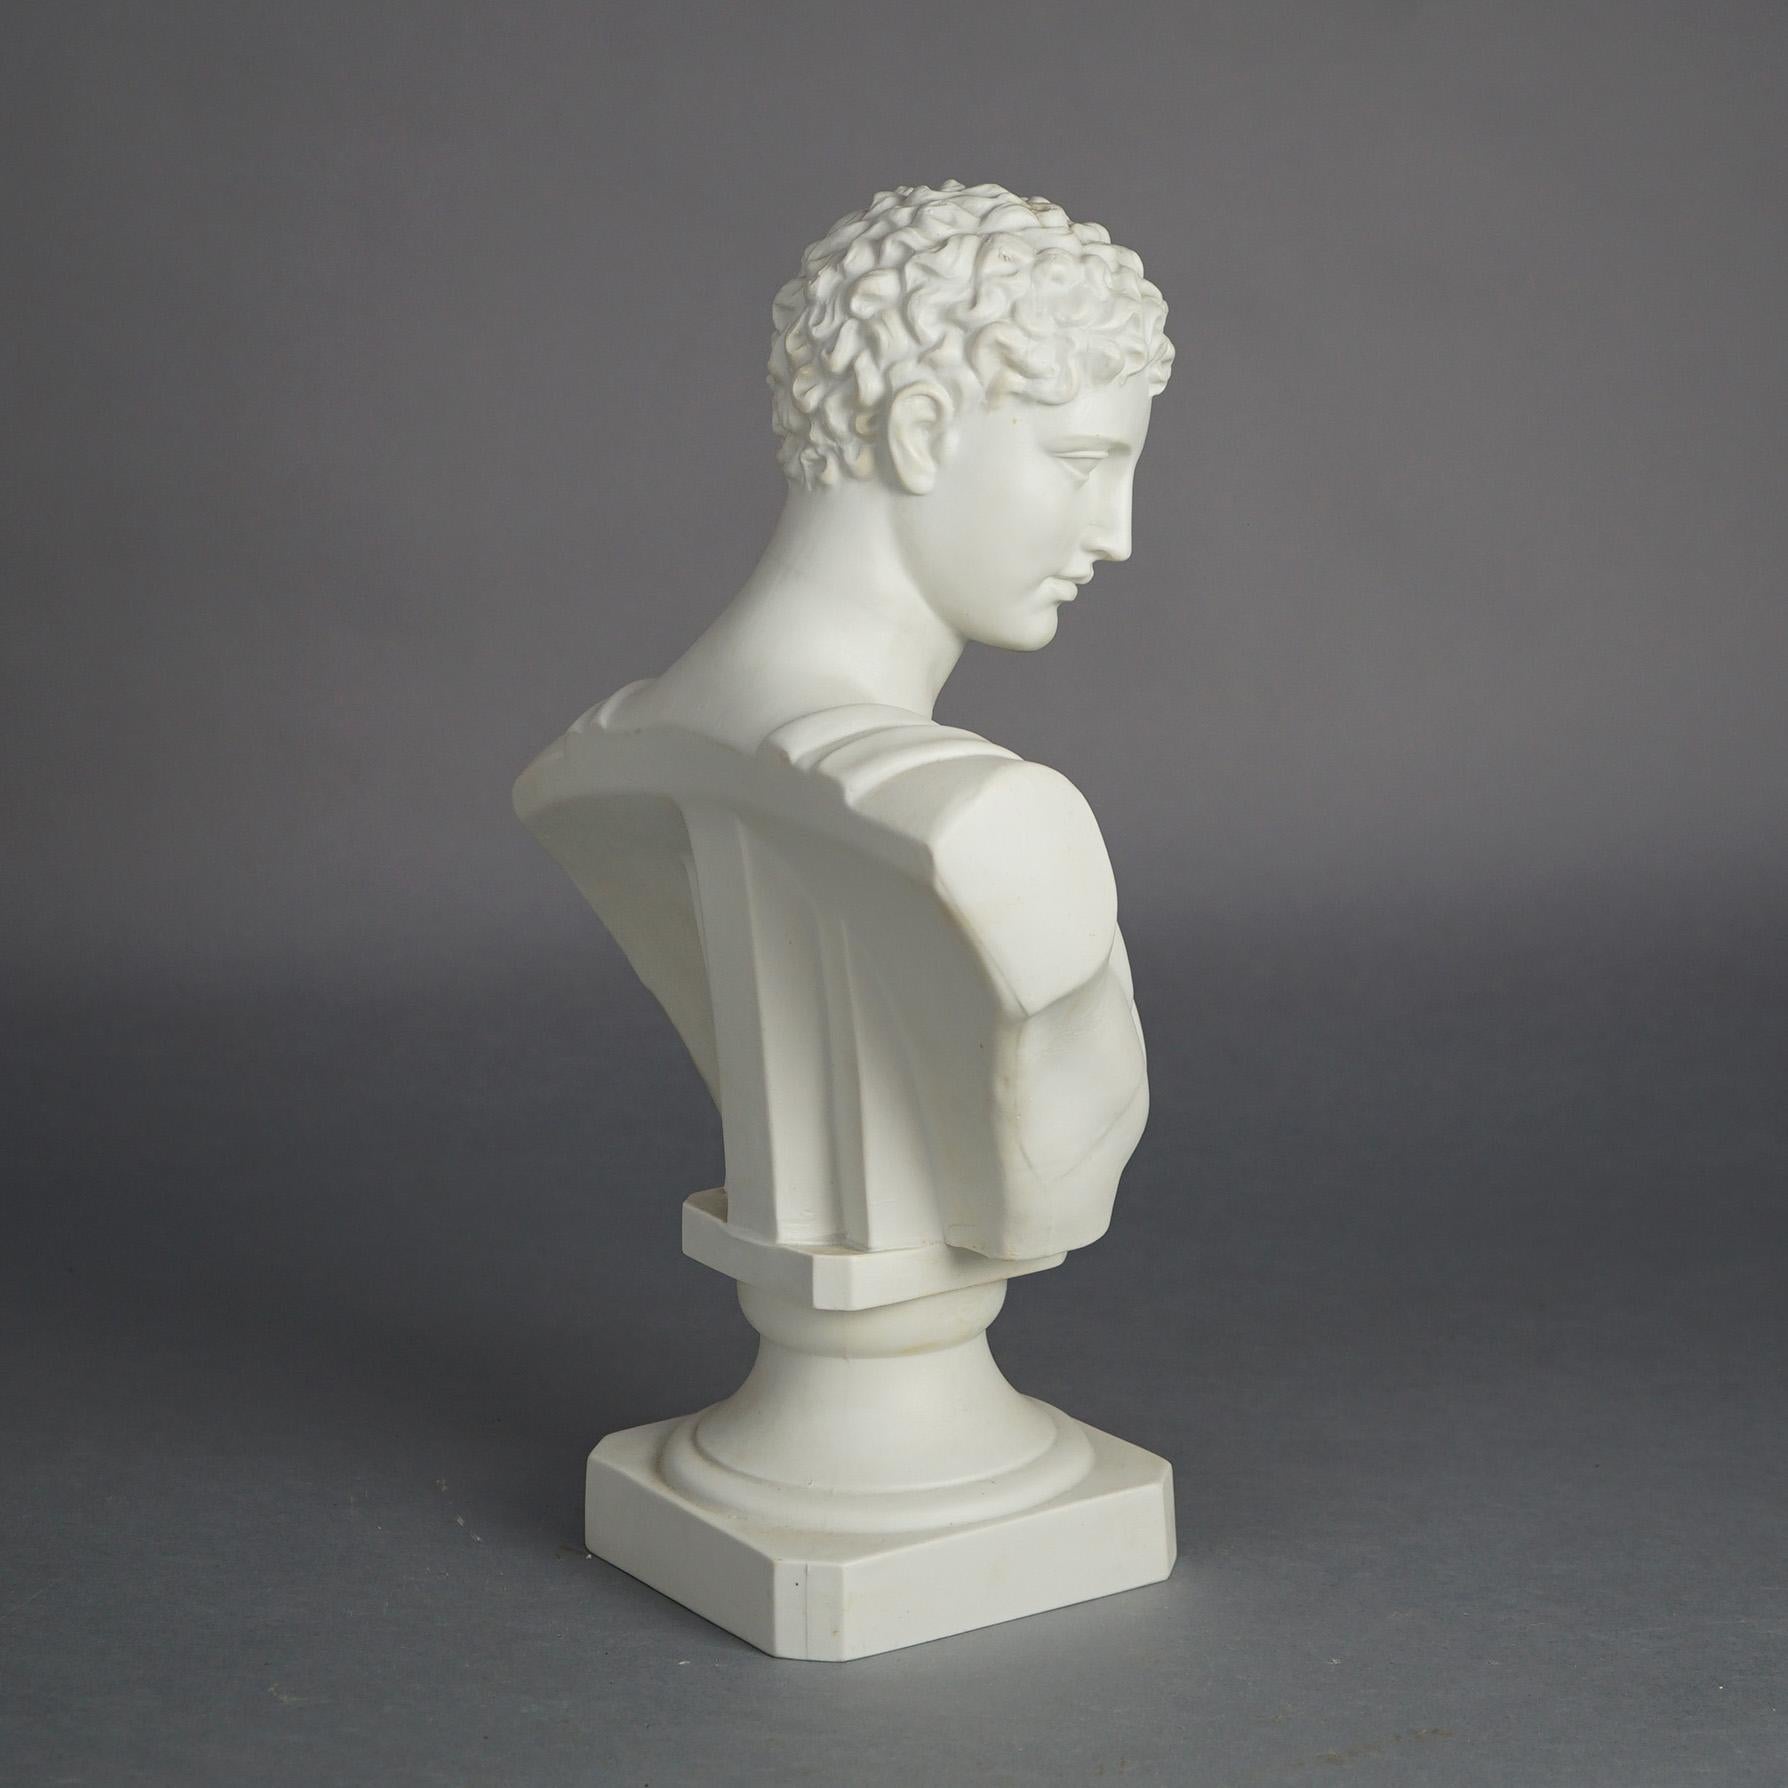 Antique French Neoclassical Parian Porcelain Bust of Michaelangelo's David C1900 For Sale 1